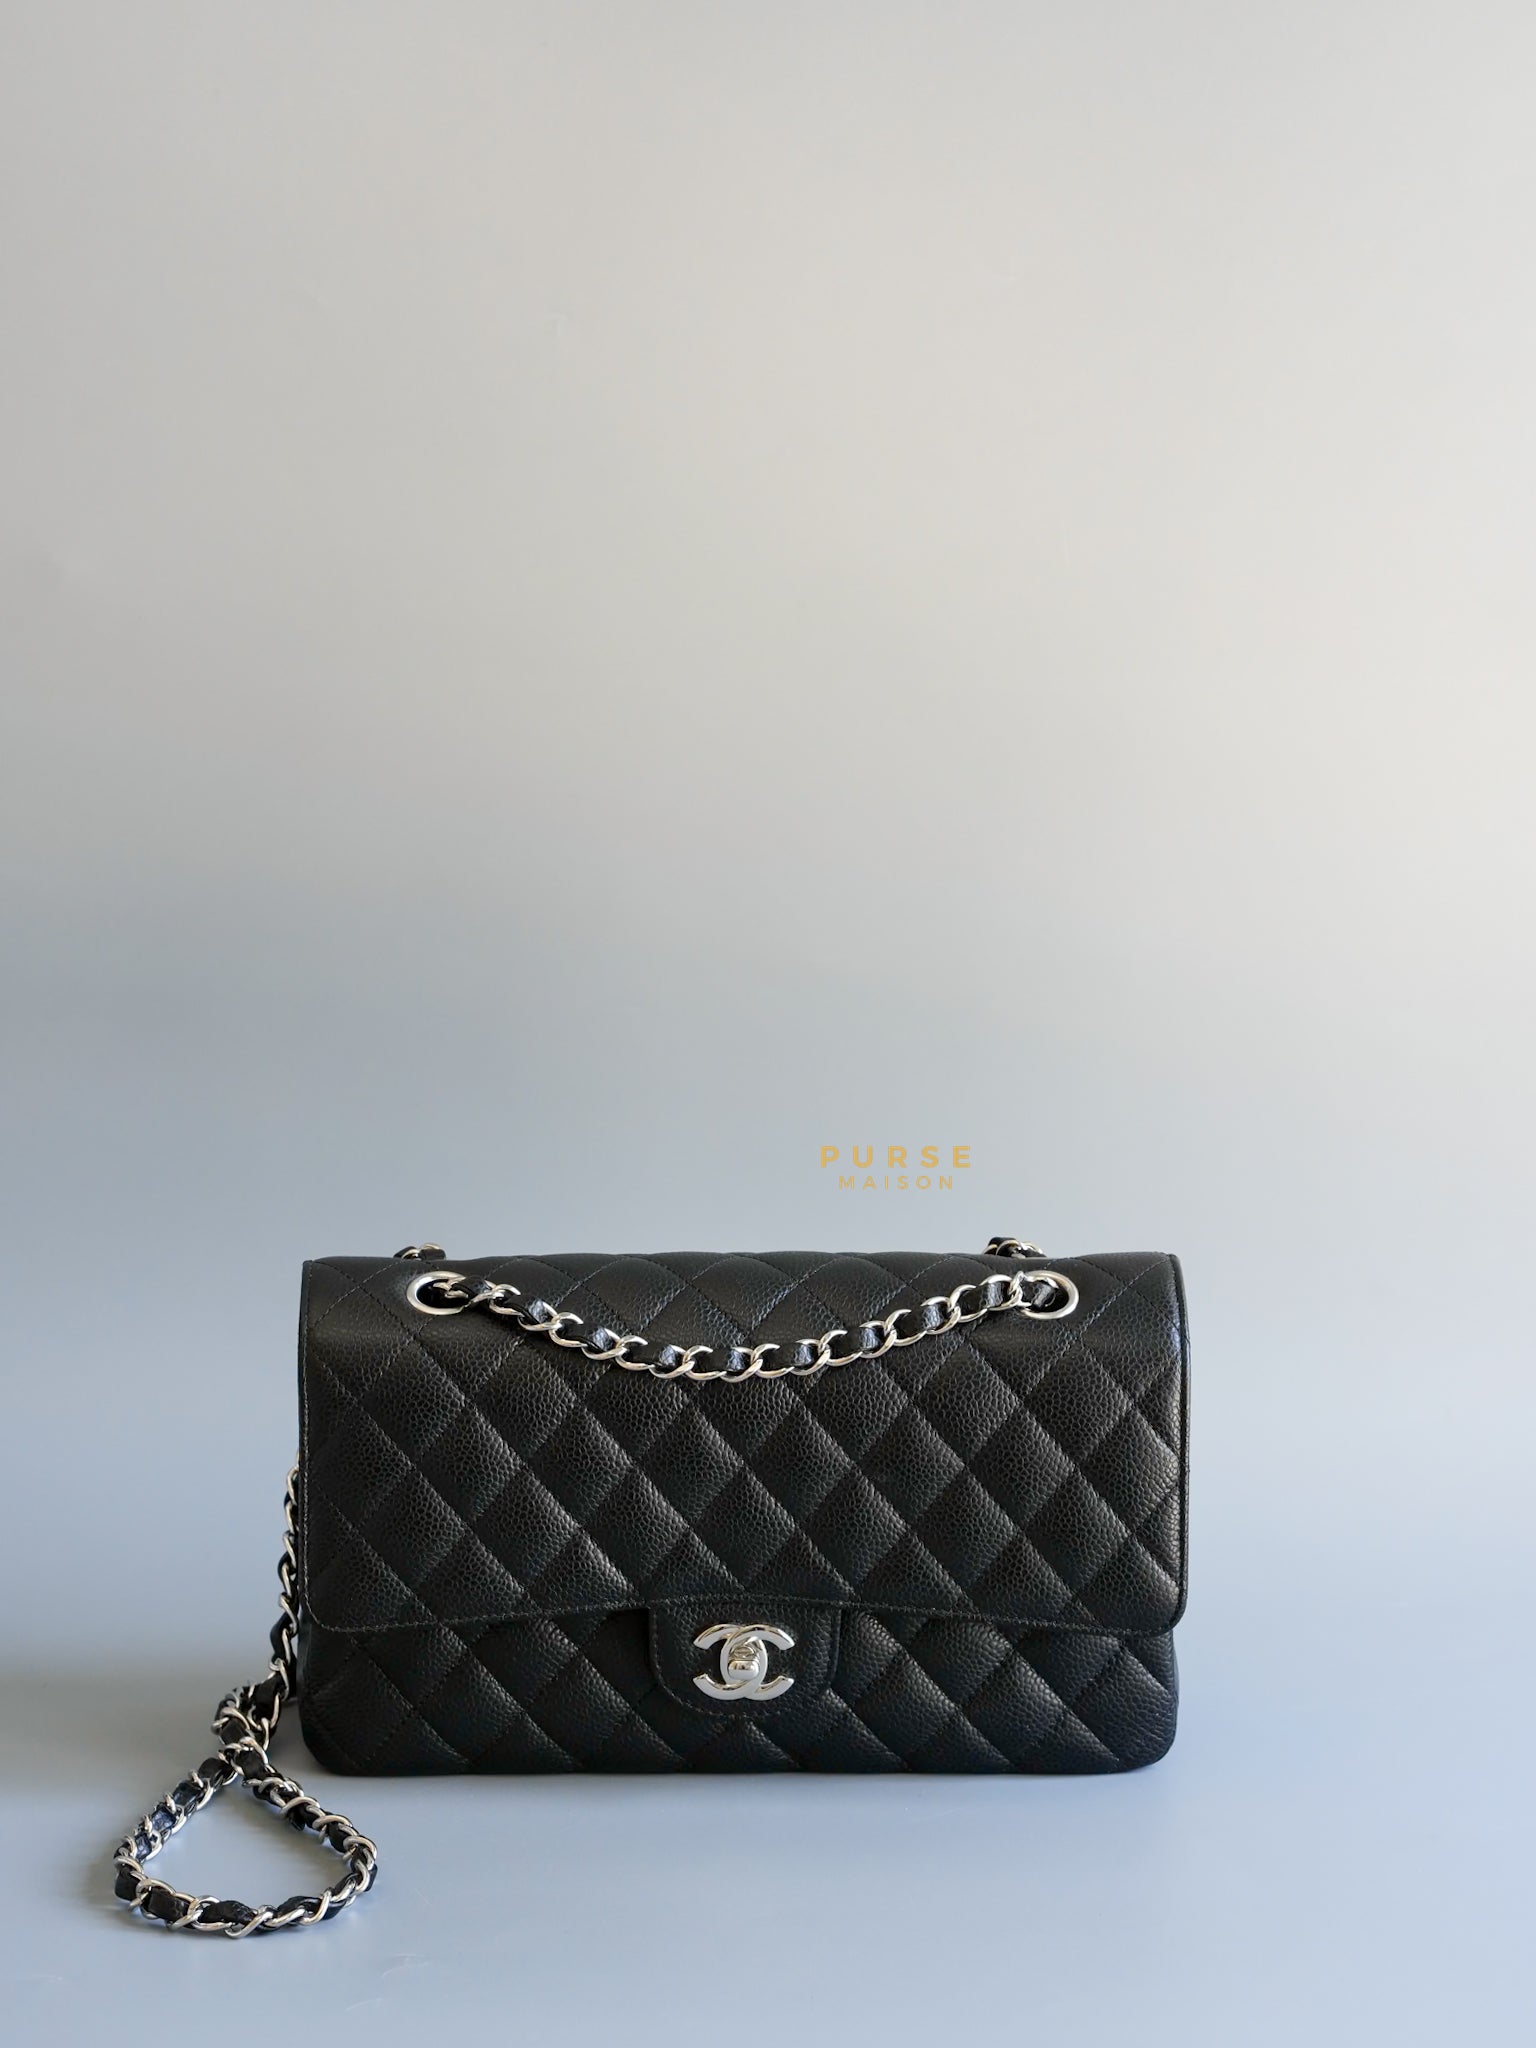 Classic Double Flap Medium in Black Caviar Leather and Silver Hardware (Microchip) | Purse Maison Luxury Bags Shop